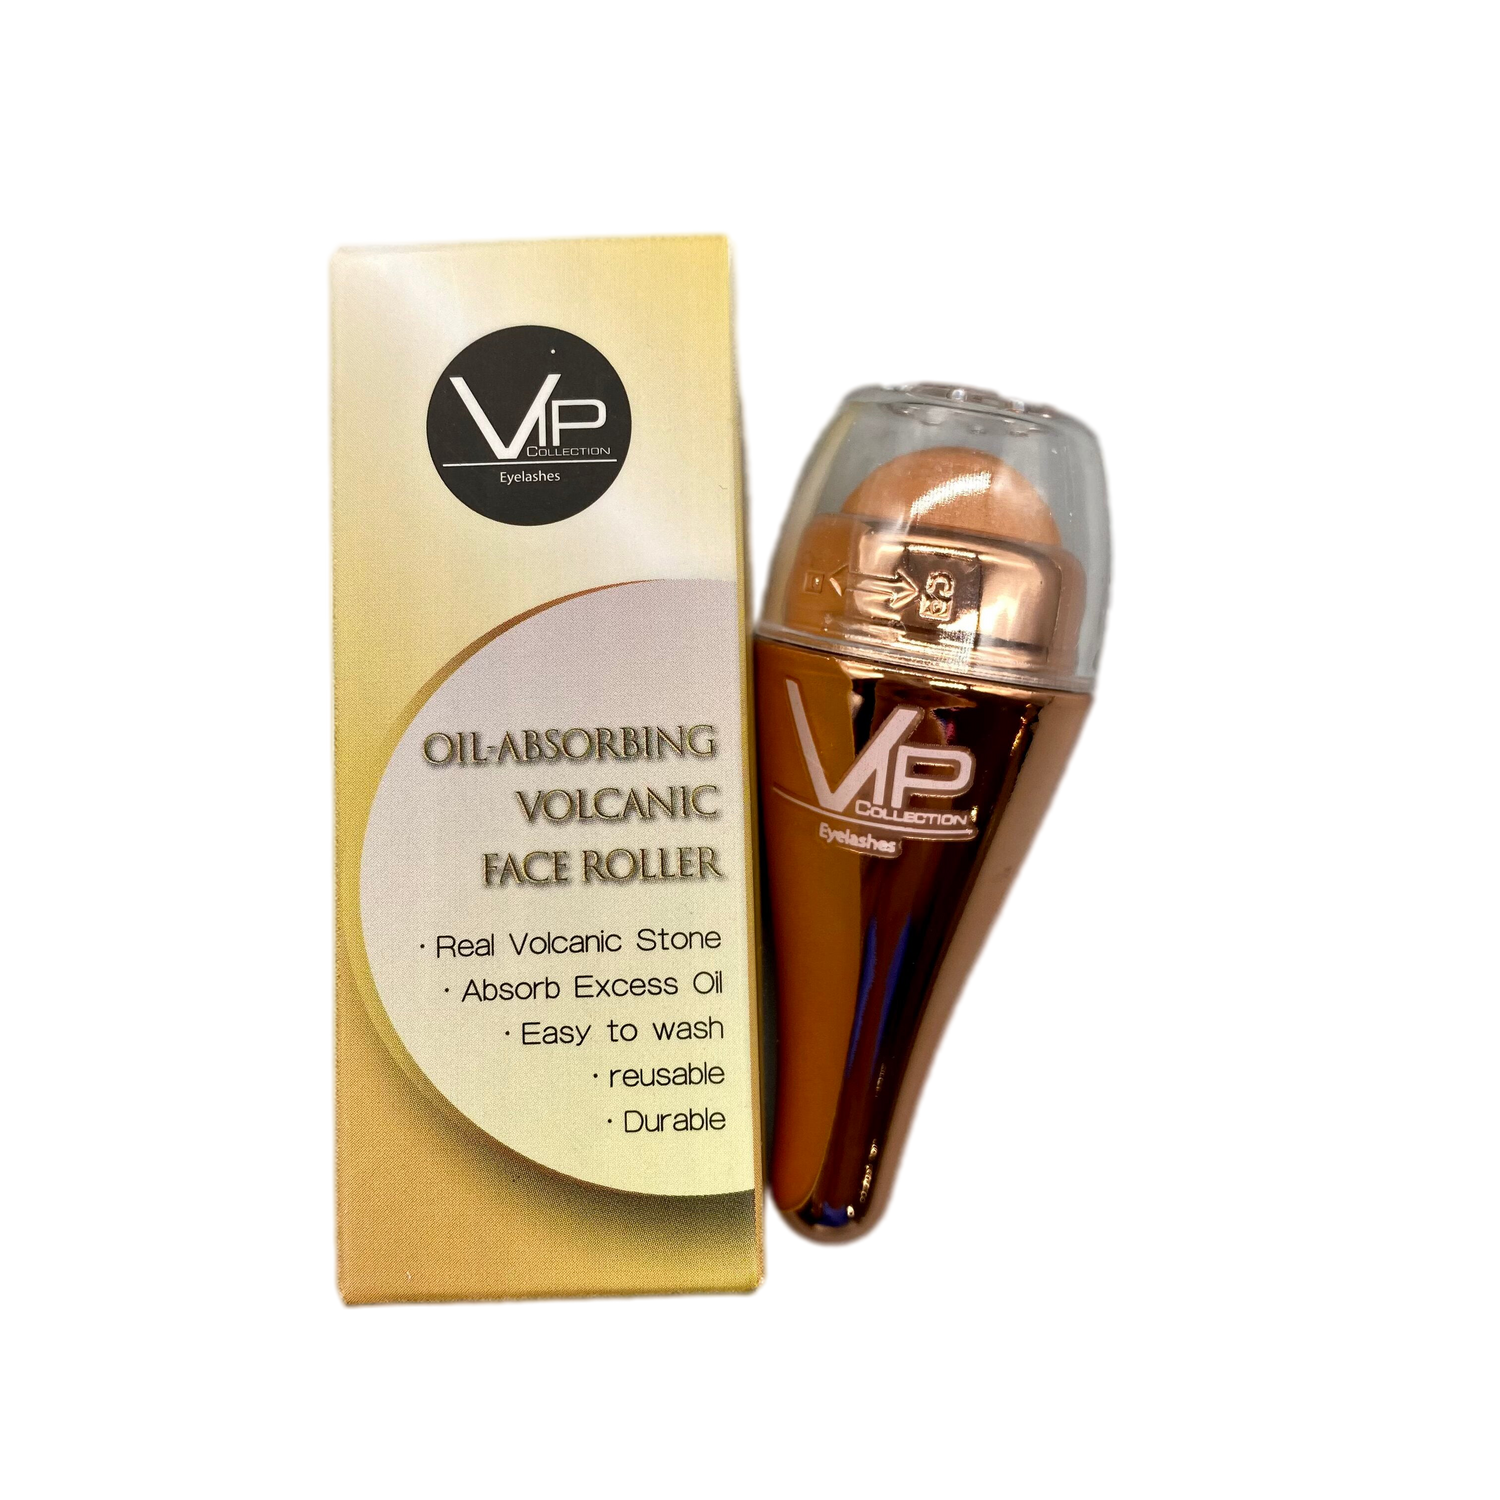 New! Oil Absorbing Volcanic Face Roller - VIP Extensions